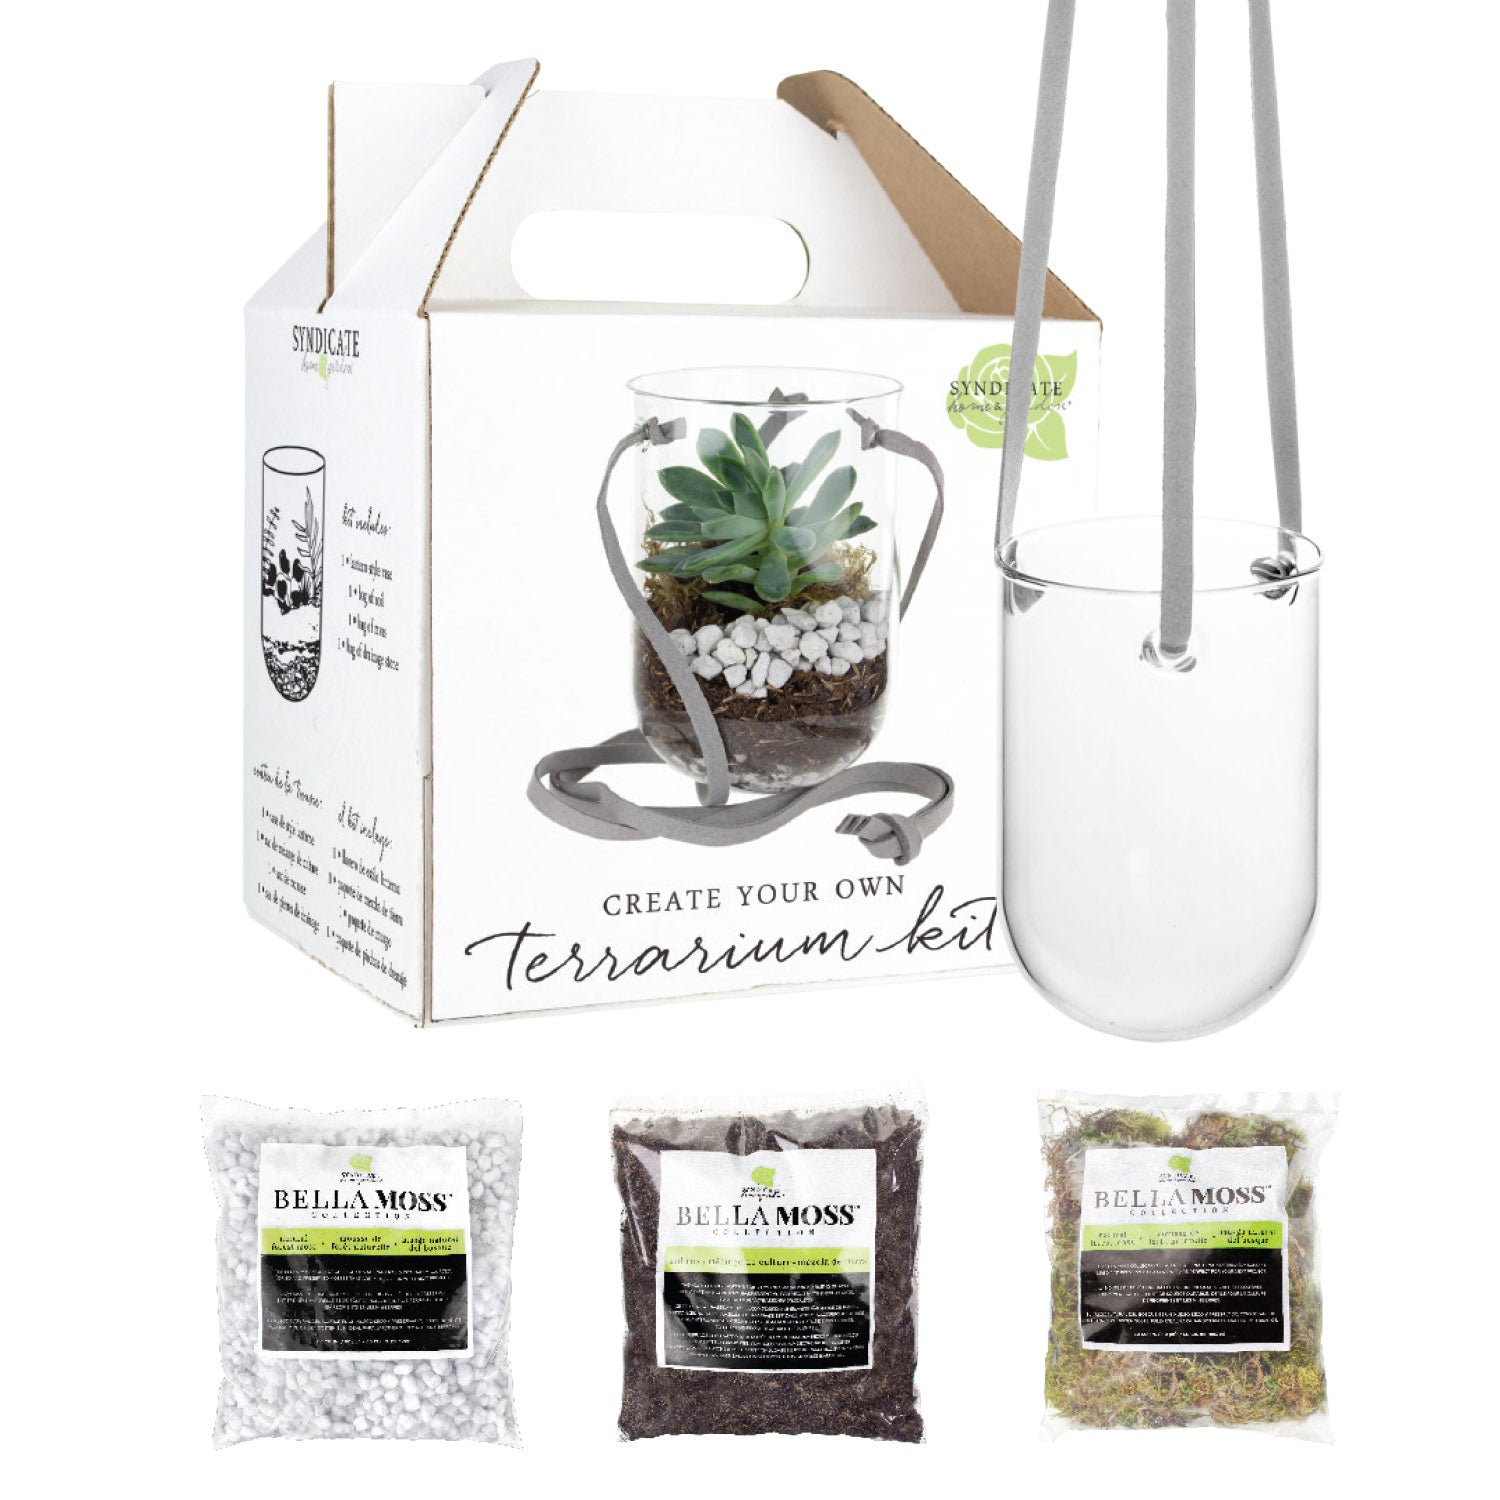 A hanging capsule terrarium kit that is cylindrical and comes with "Bella Moss" pebbles, soil, and other fillers and instructions to complete your kit.